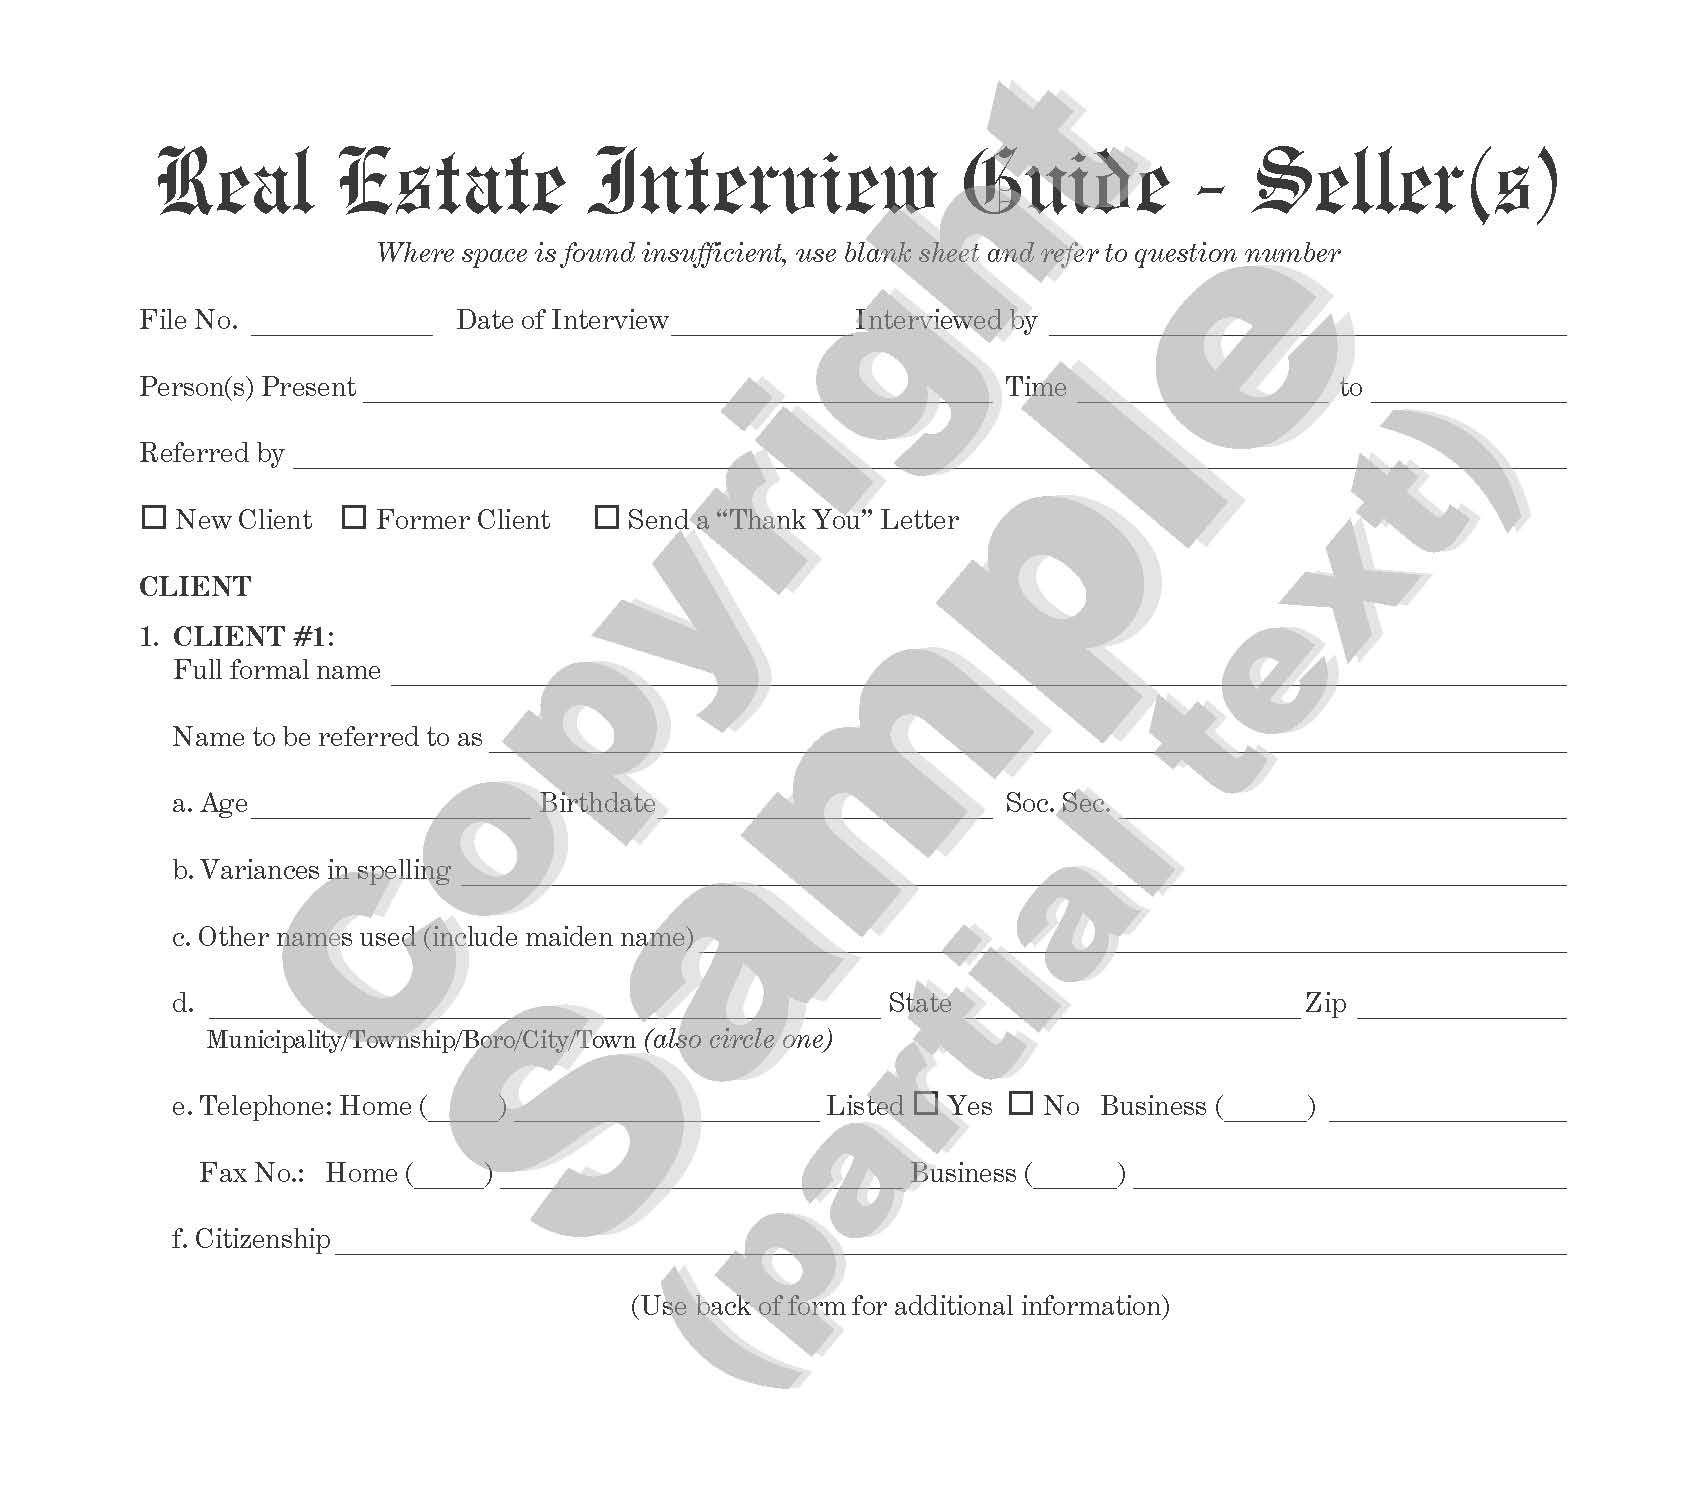 Real Estate Interview Guide to be Used for a Seller